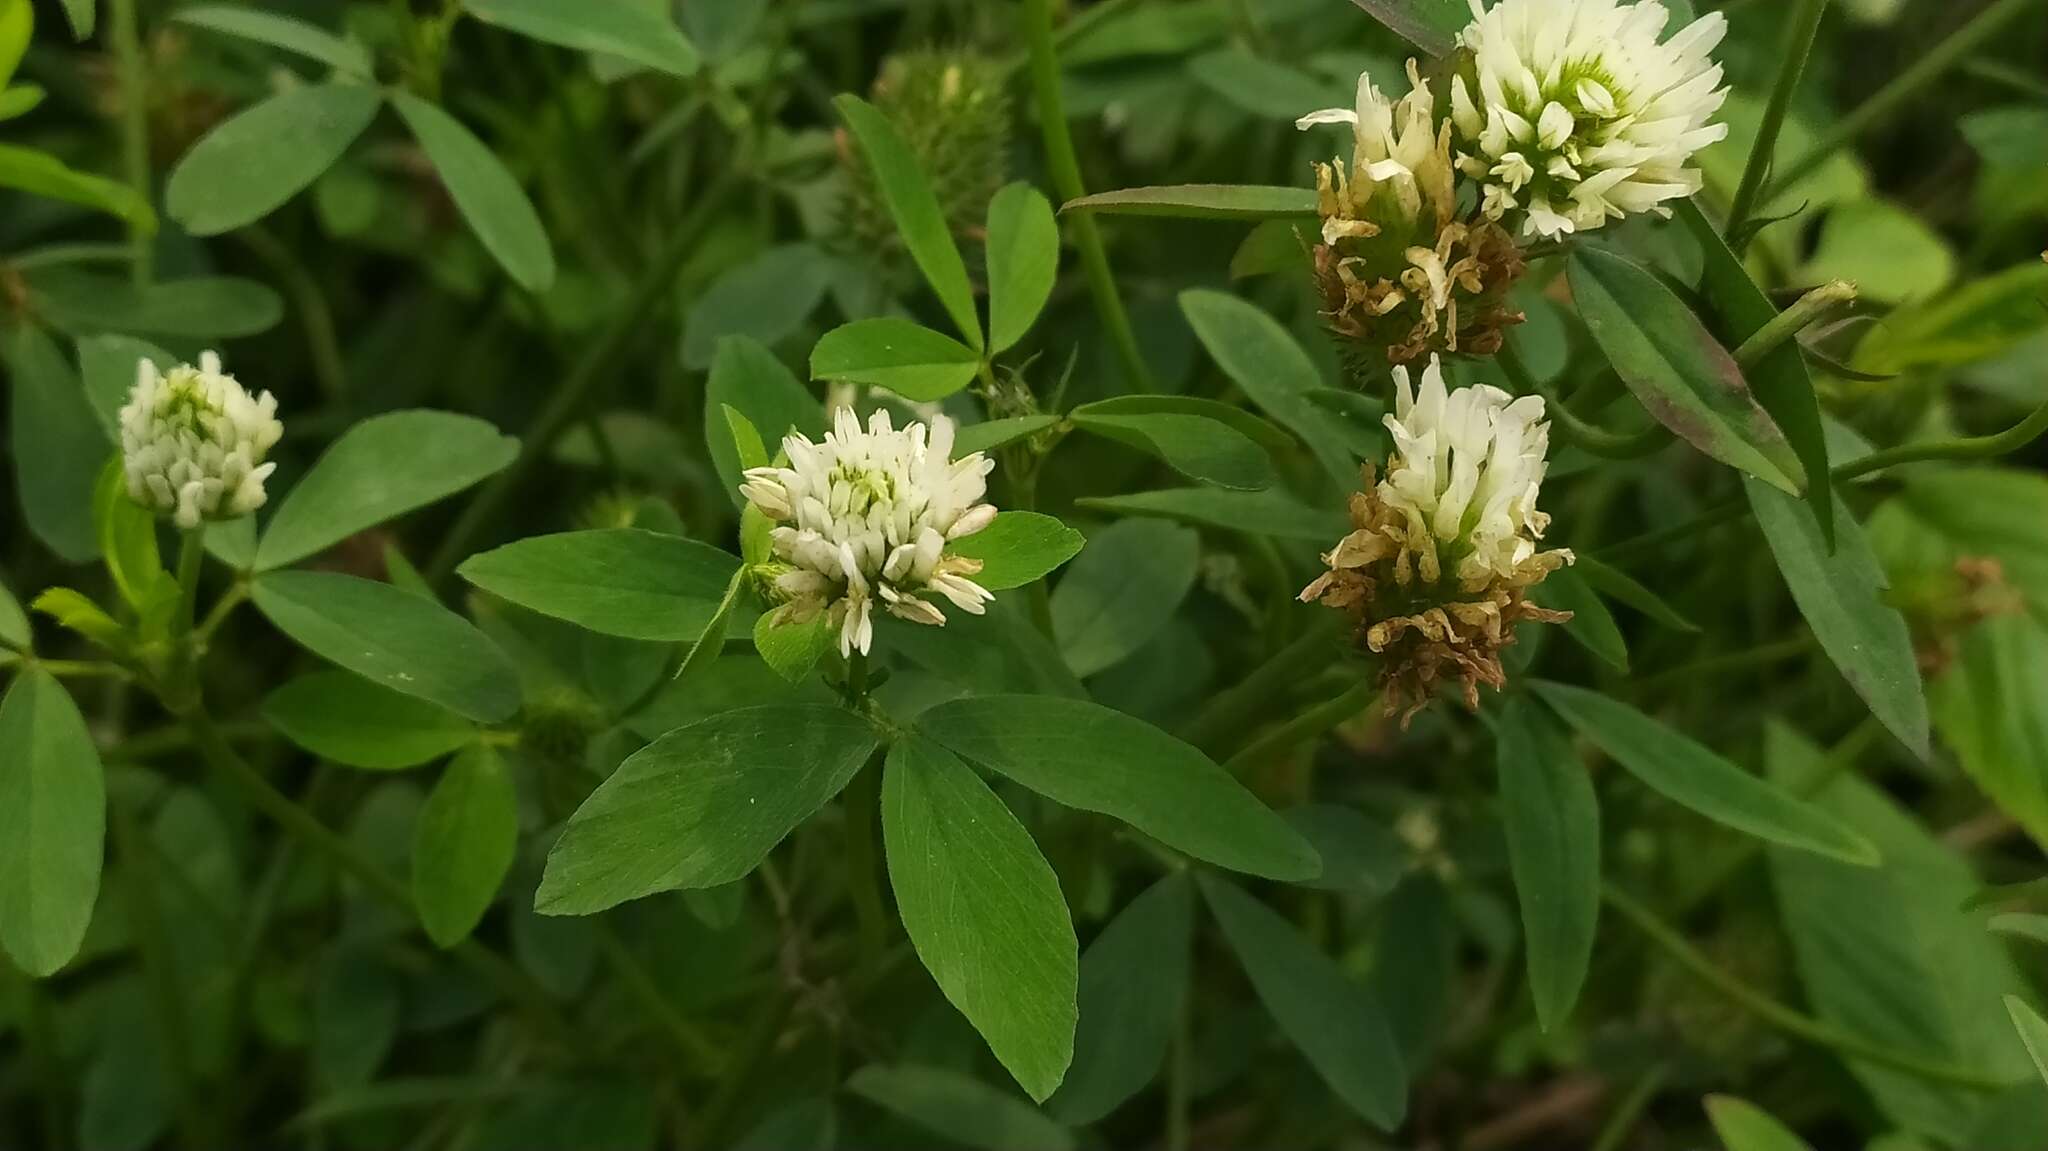 Image of Egyptian clover